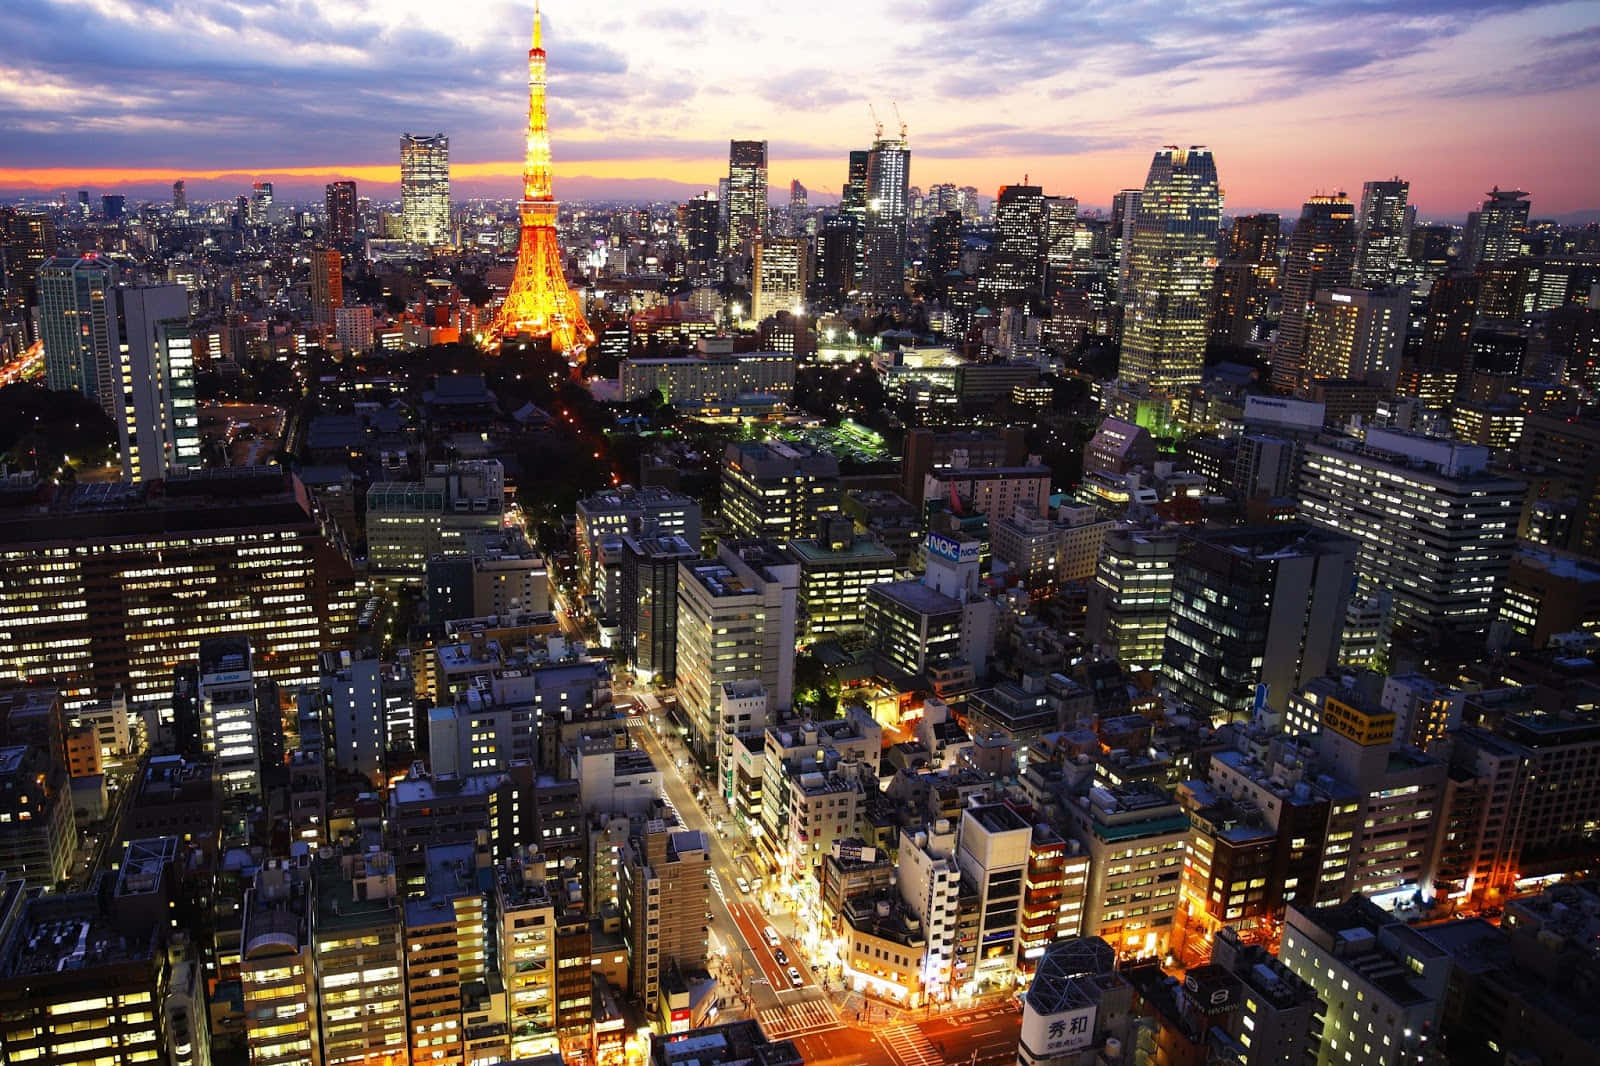 The incredible cityscape of Tokyo, Japan awes all who visit